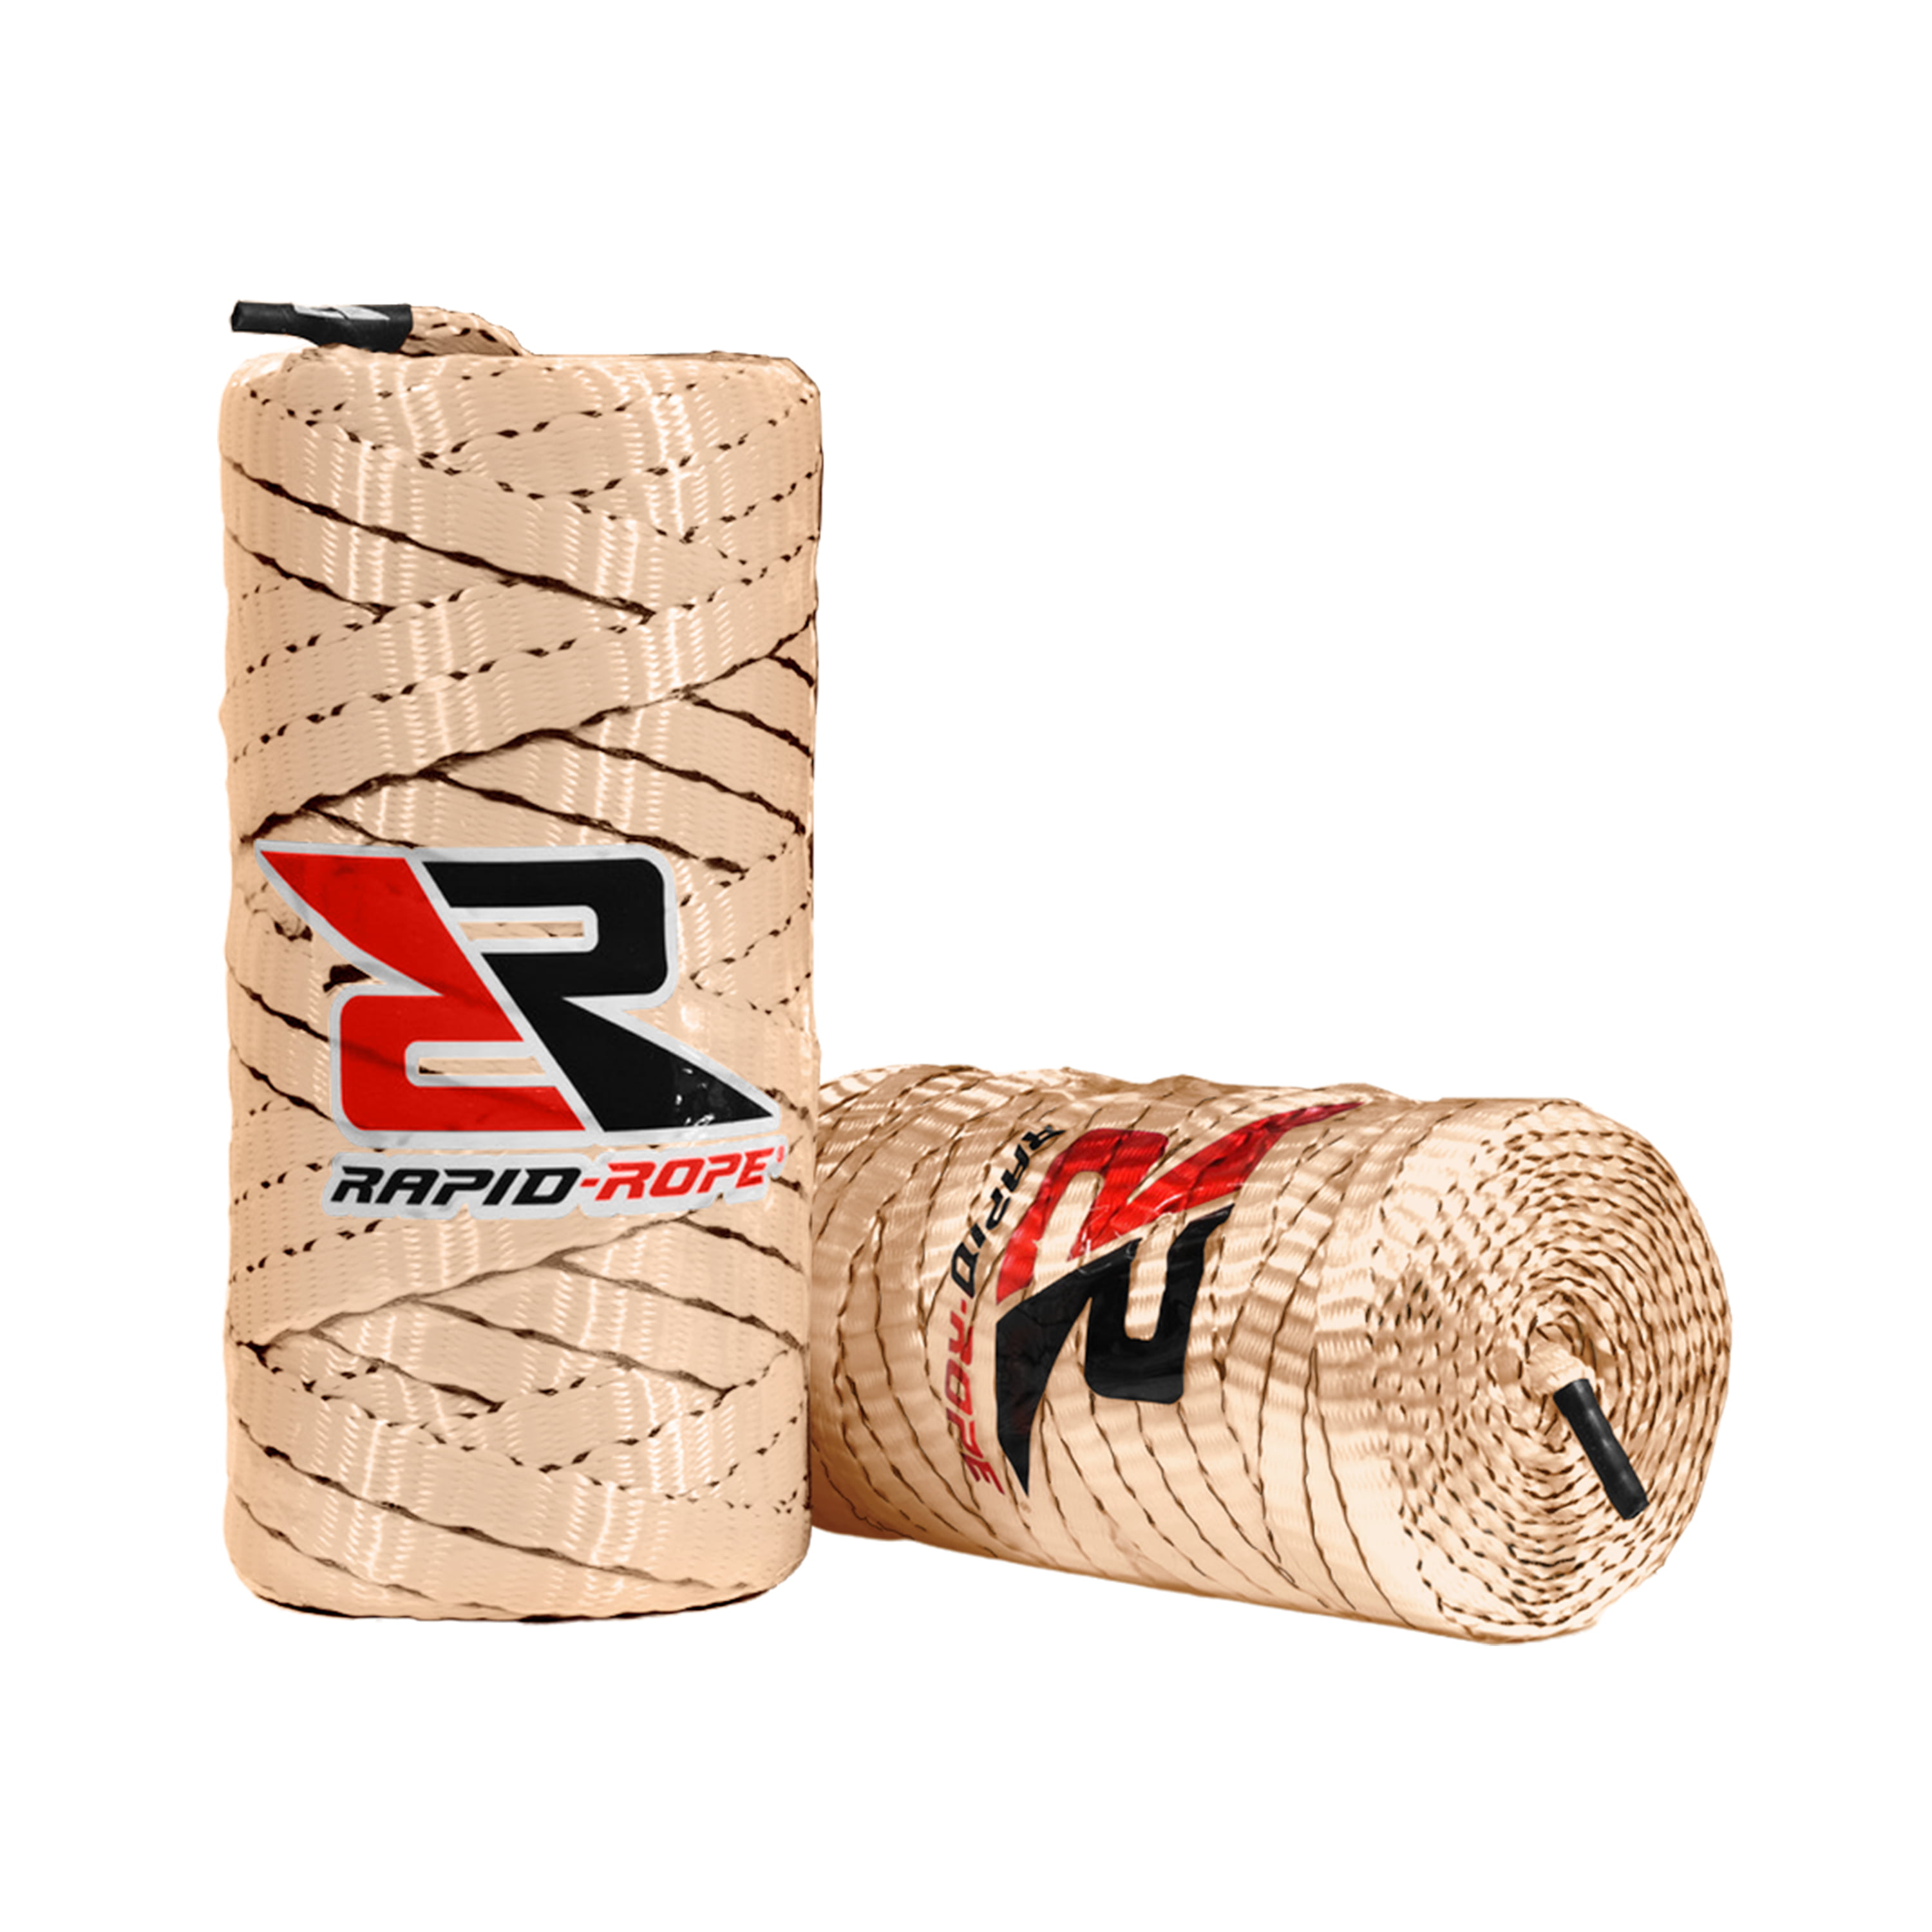 Rapid Rope Refill for Canister, Multipurpose Paracord Alternative, 2pk Tan  